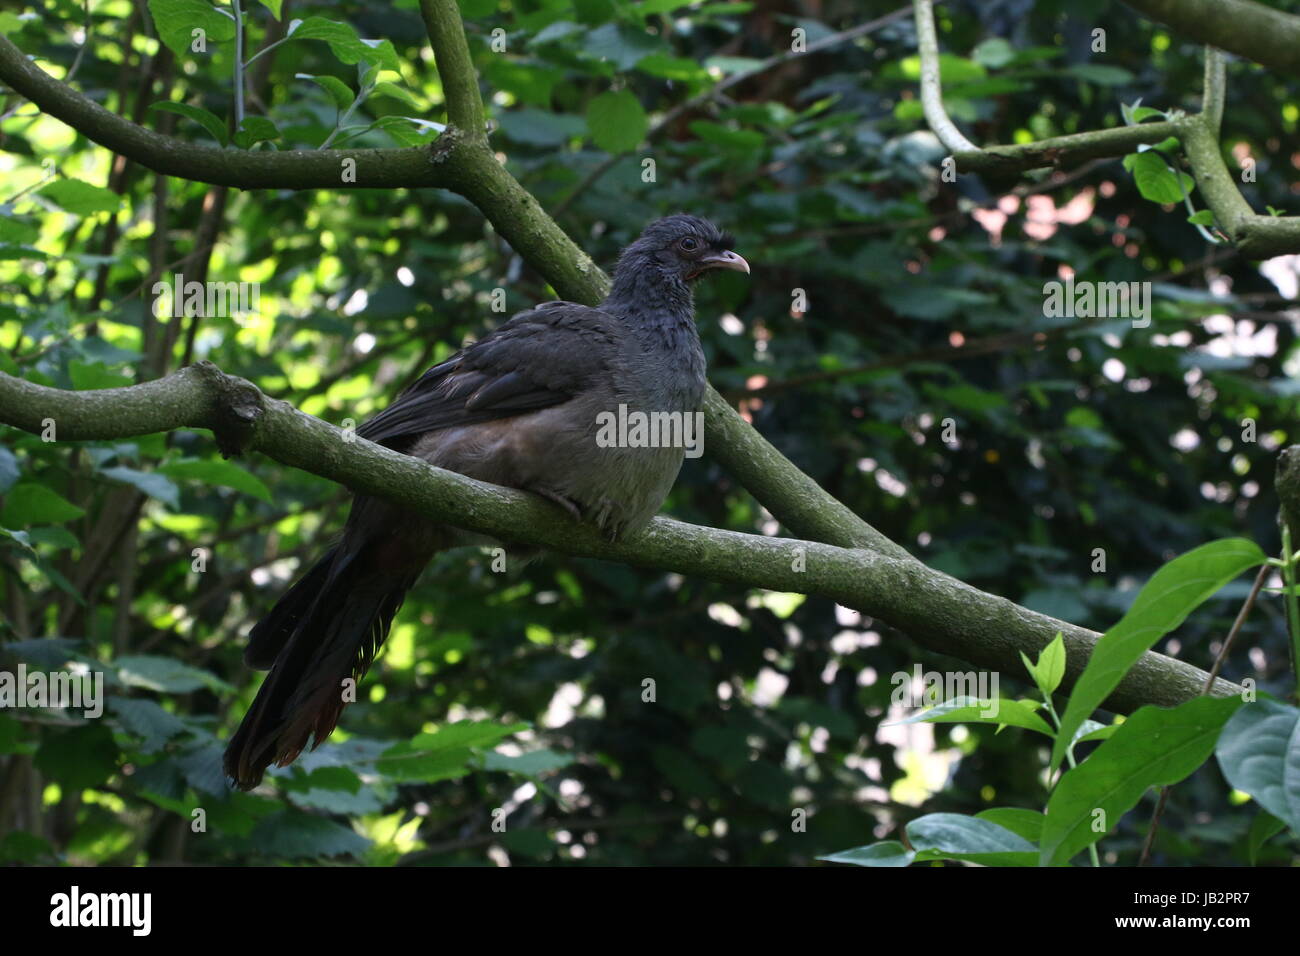 South American Chaco Chachalaca fowl (Ortalis canicollis) in a tree. Stock Photo